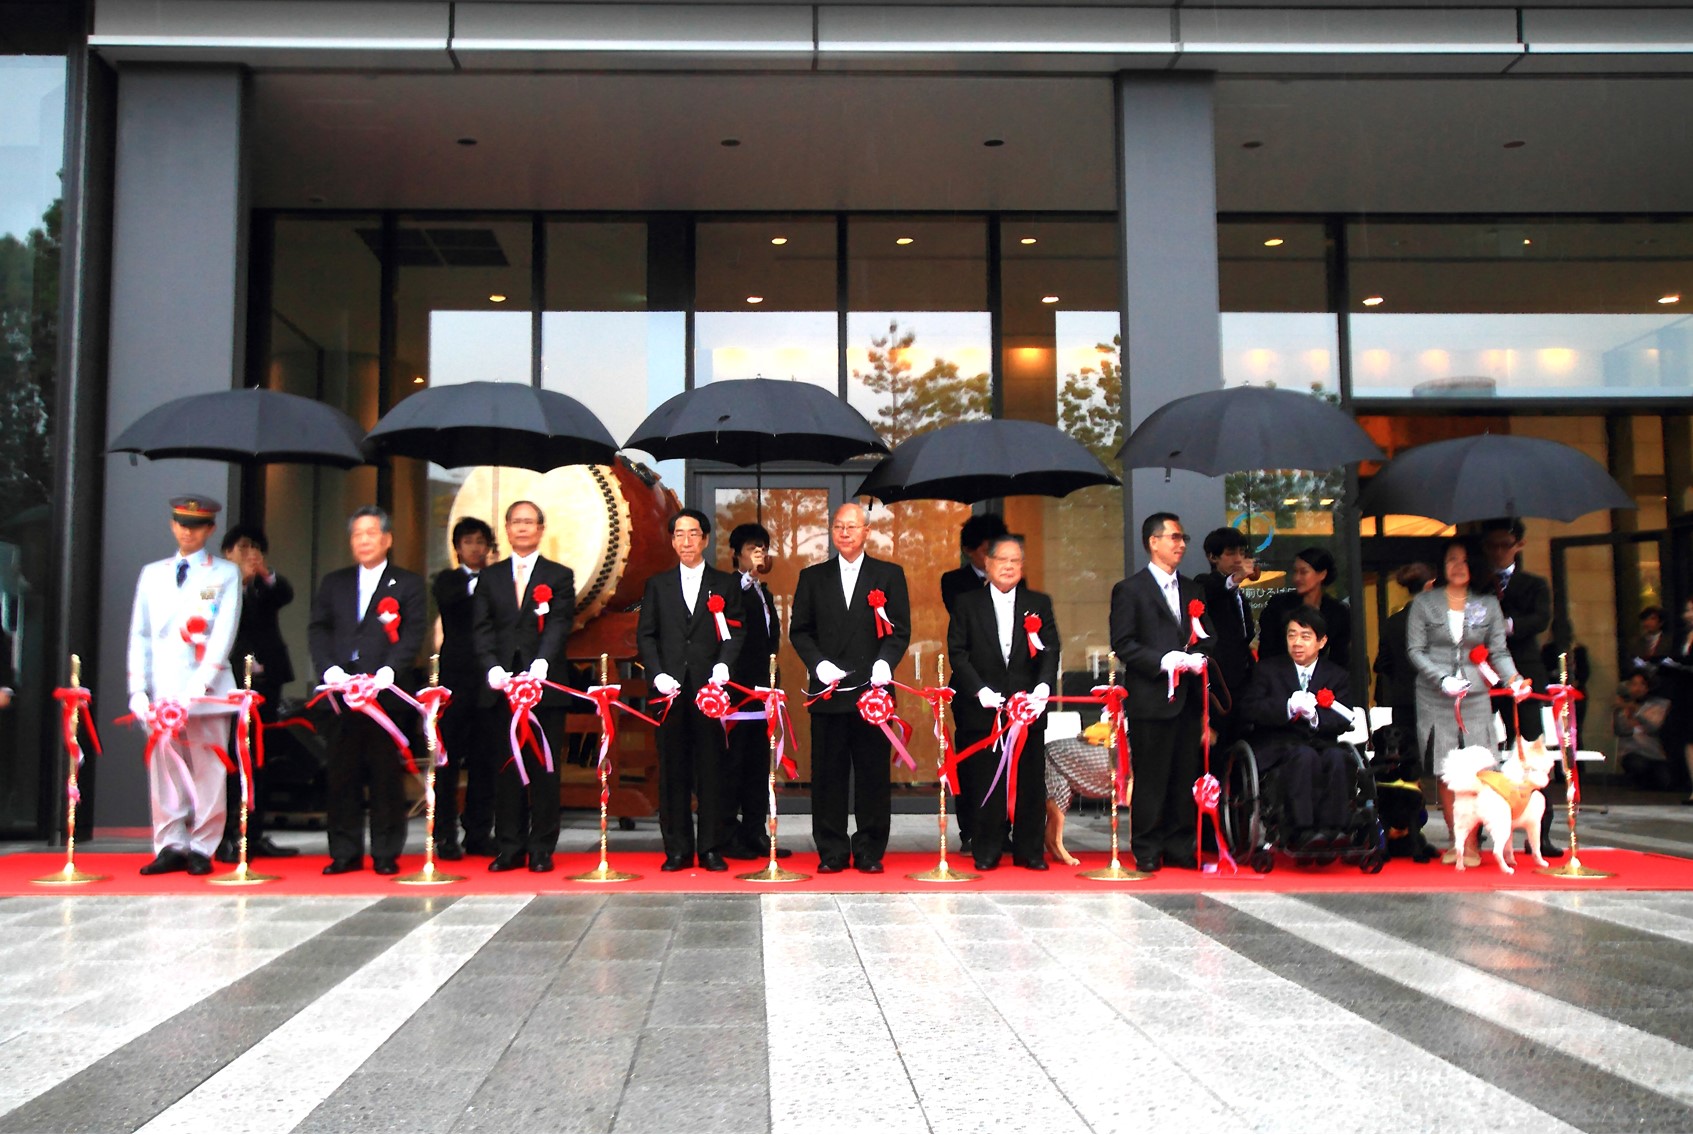 SKYTREE Official Openning 2012 (c. TOKYO SKYTREE)